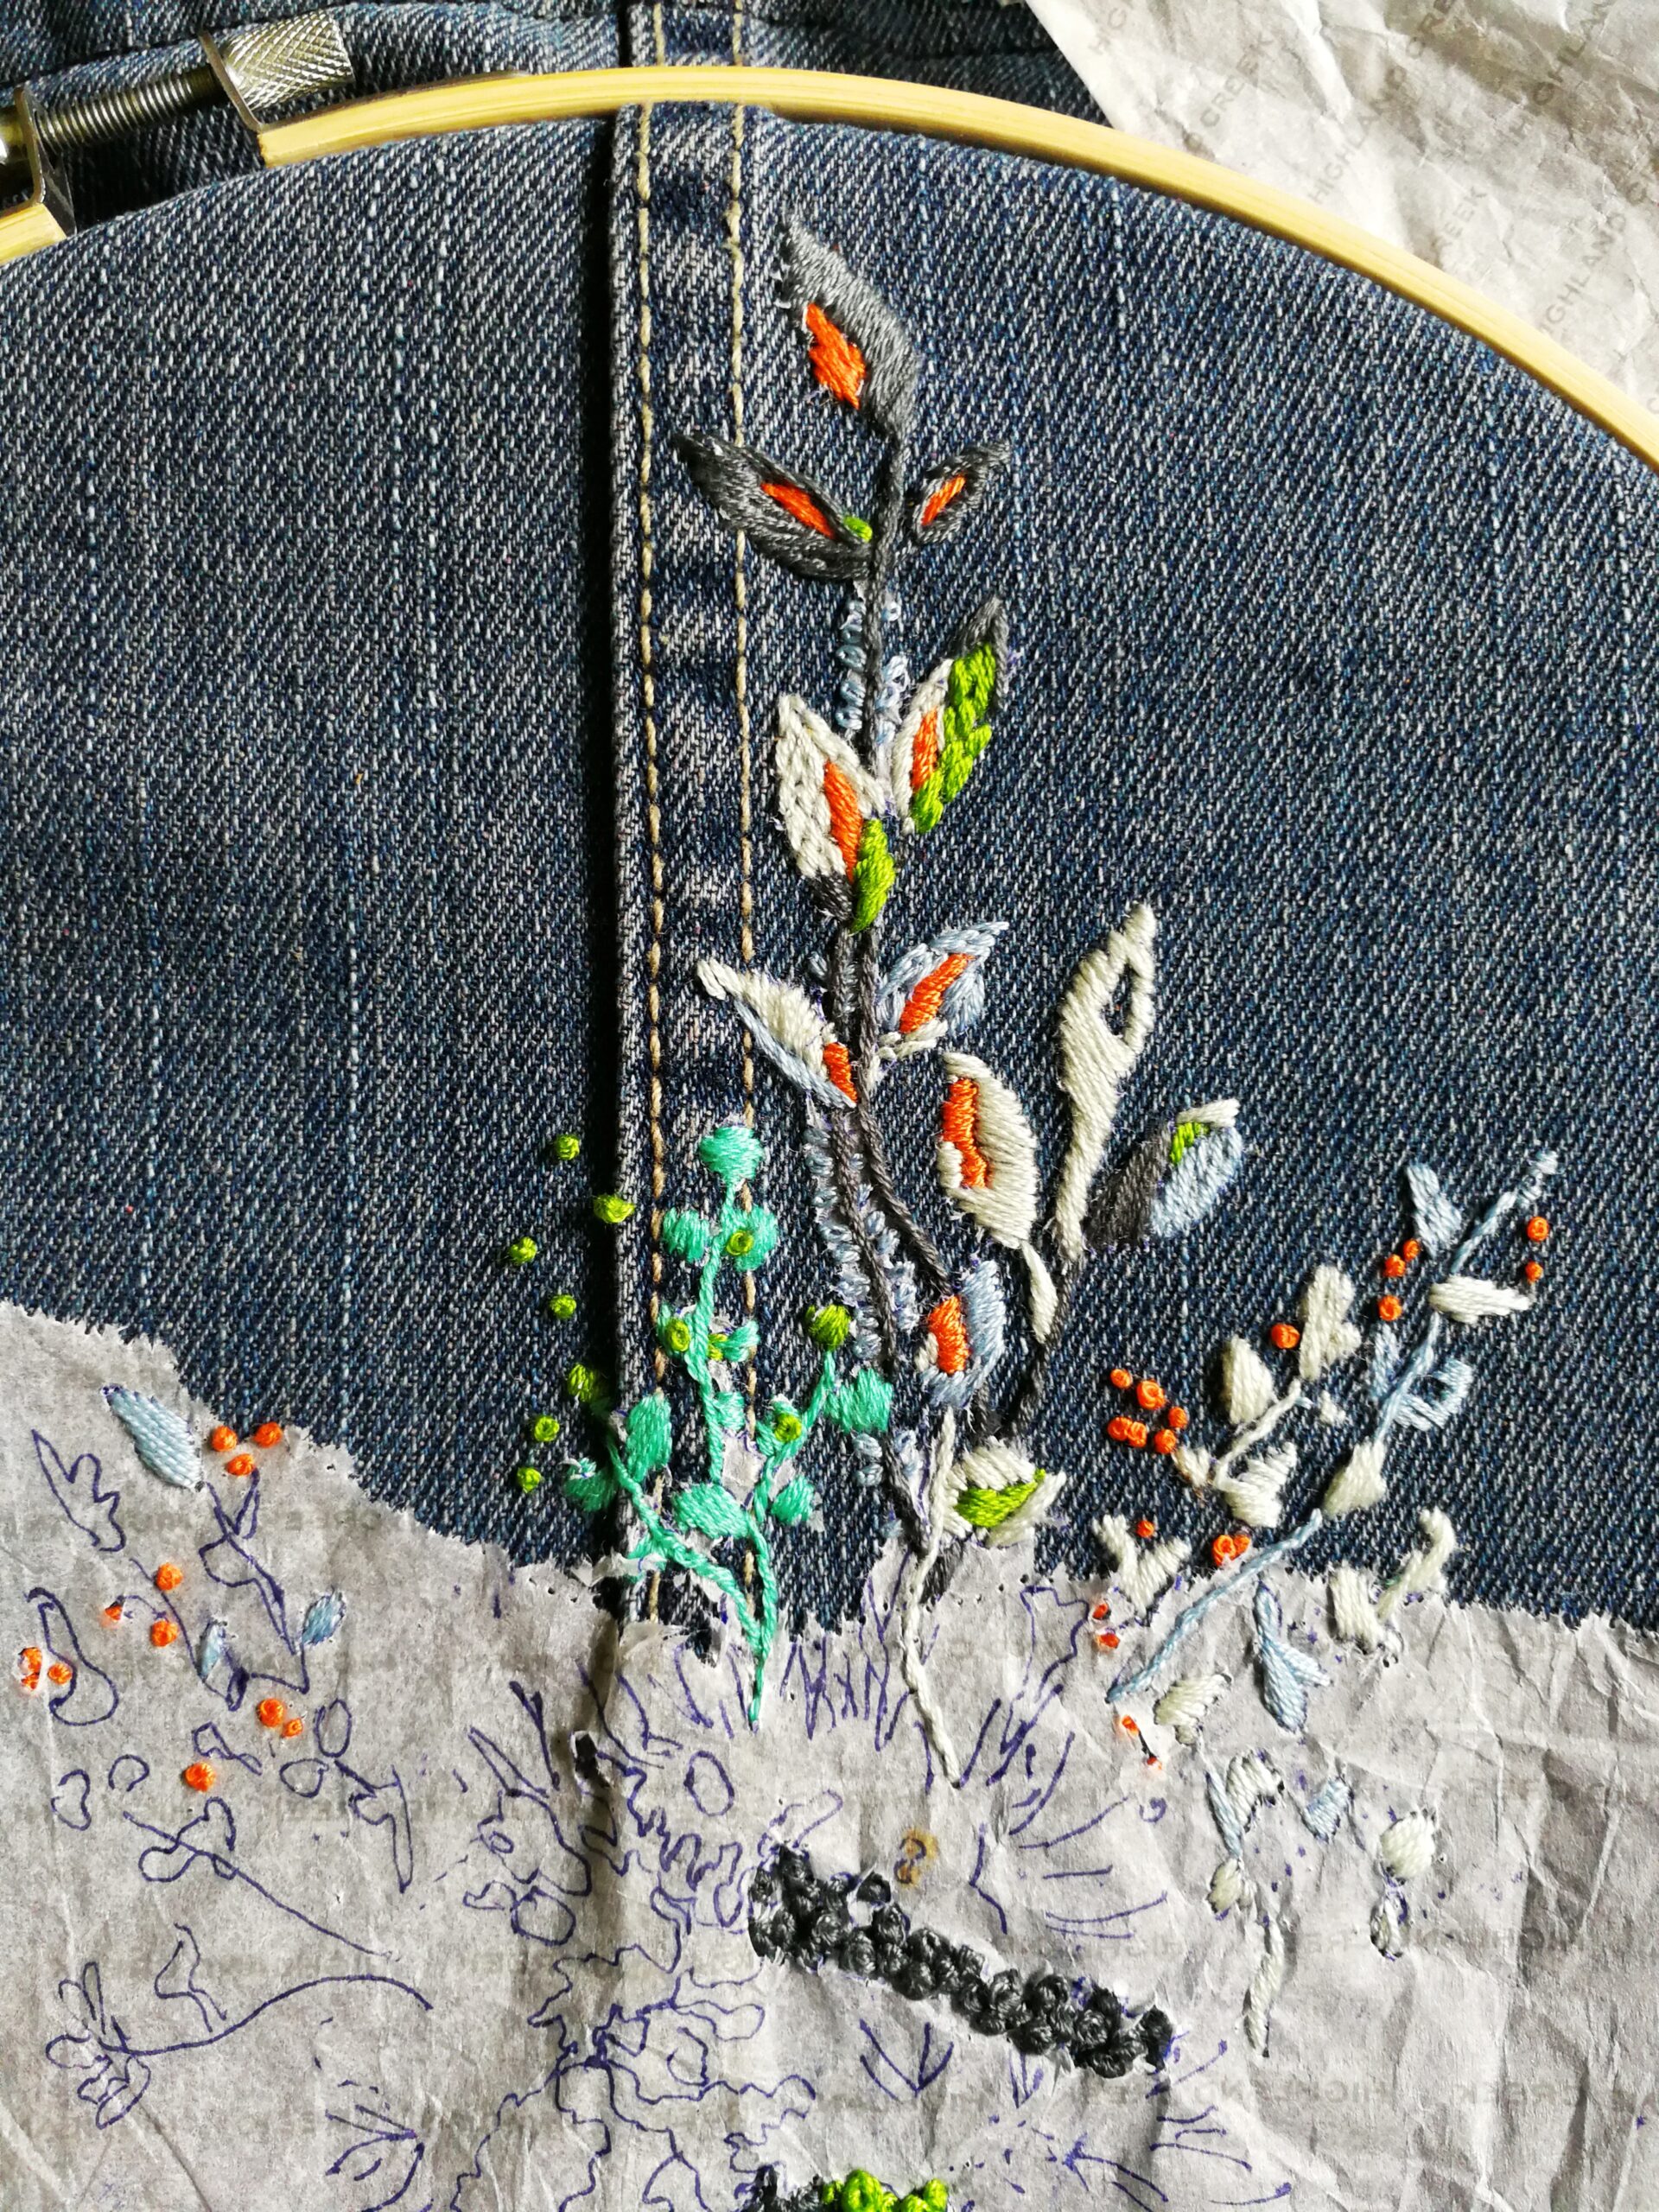 Hand Embroidery Design Pattern and Collaboration with amazing Artist Nini